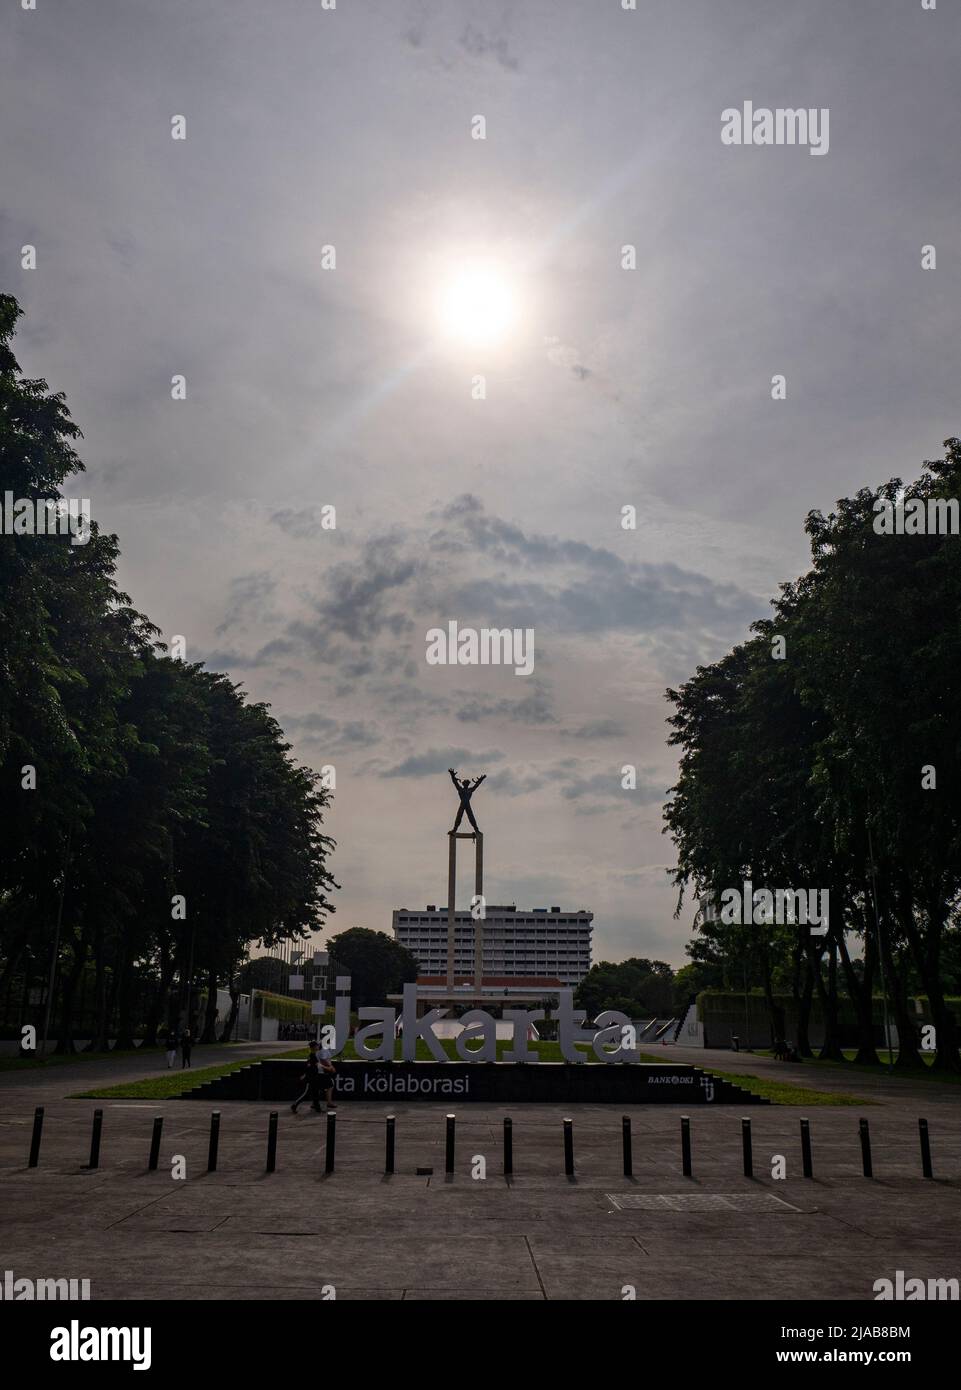 Jakarta, Indonesia - May 10, 2022: The West Irian Liberation Monument is a post-war modernist monument located in Banteng Square, Jakarta, Indonesia. Stock Photo